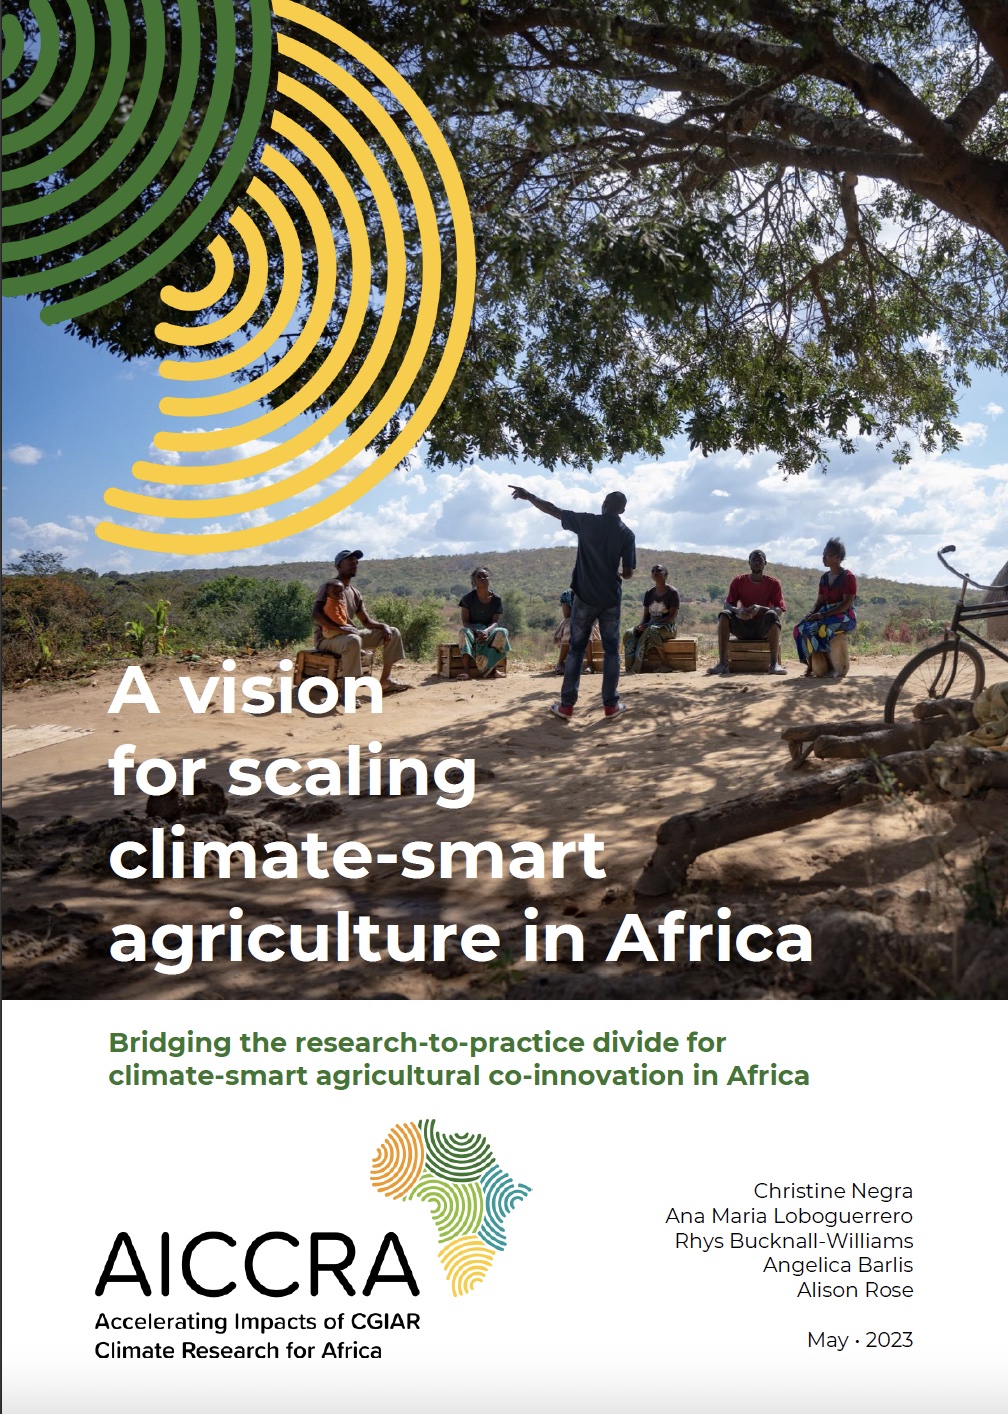 A vision for scaling climate-smart agriculture in Africa